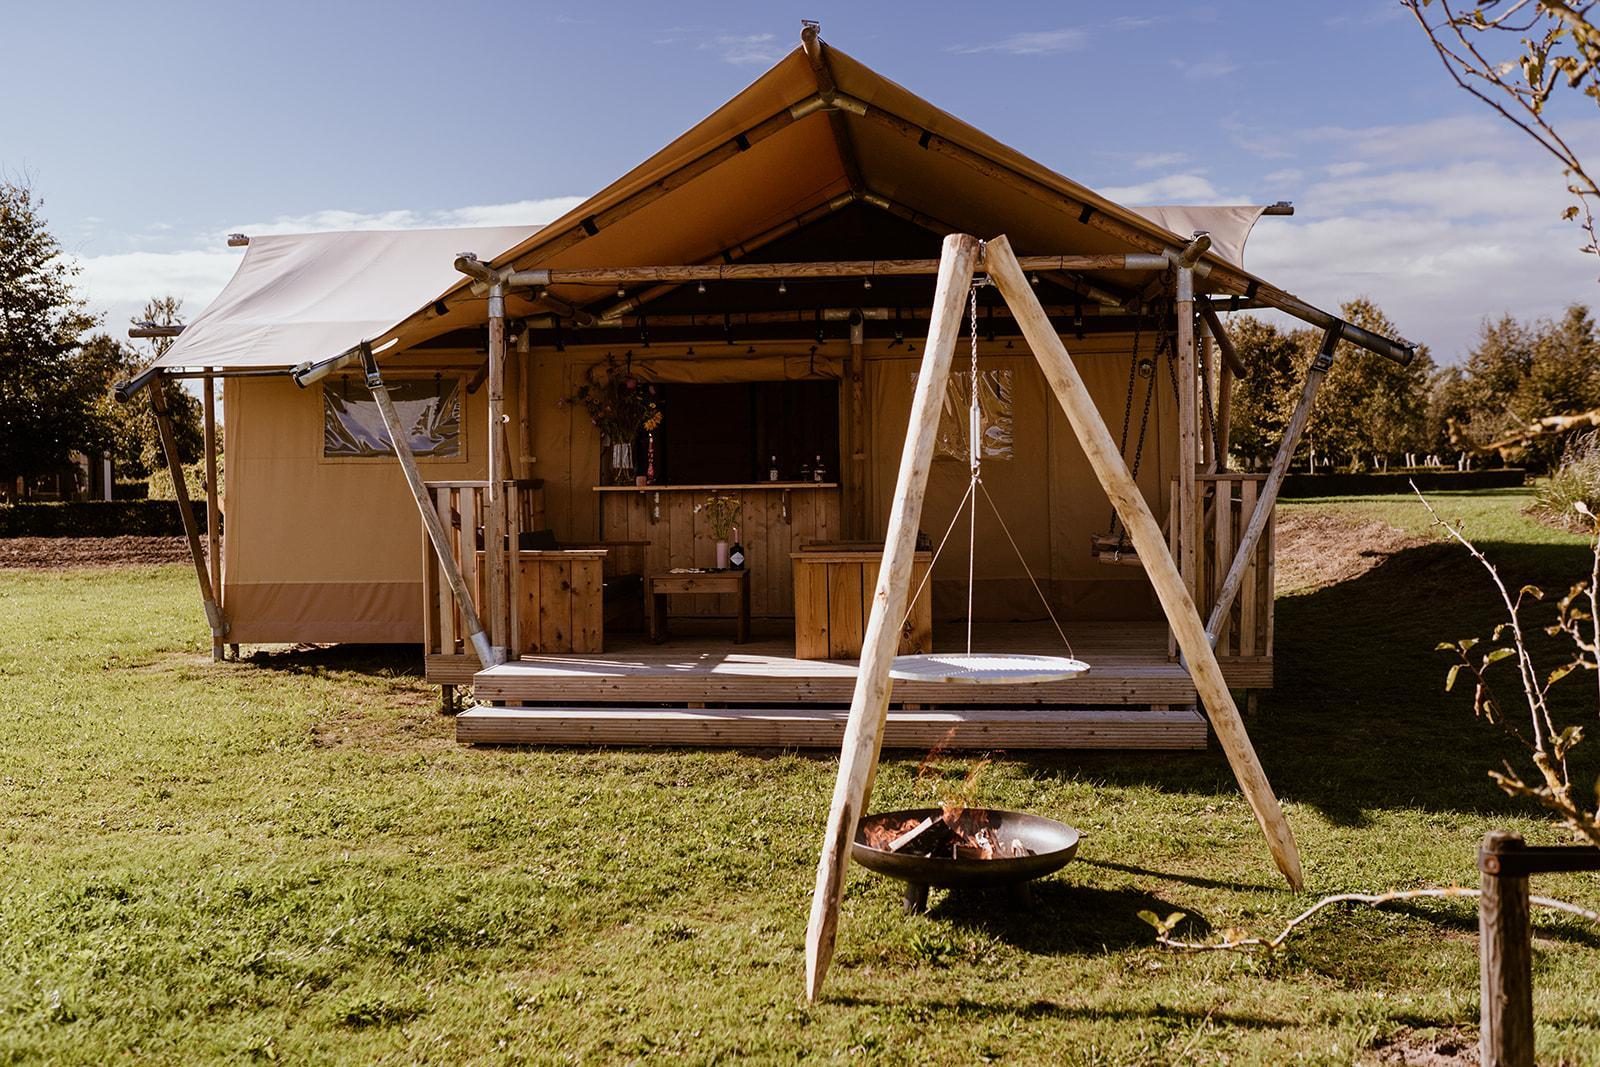 Groupaccommodation 'de Blokhut' + 4 5-person glamping tents (20 people)